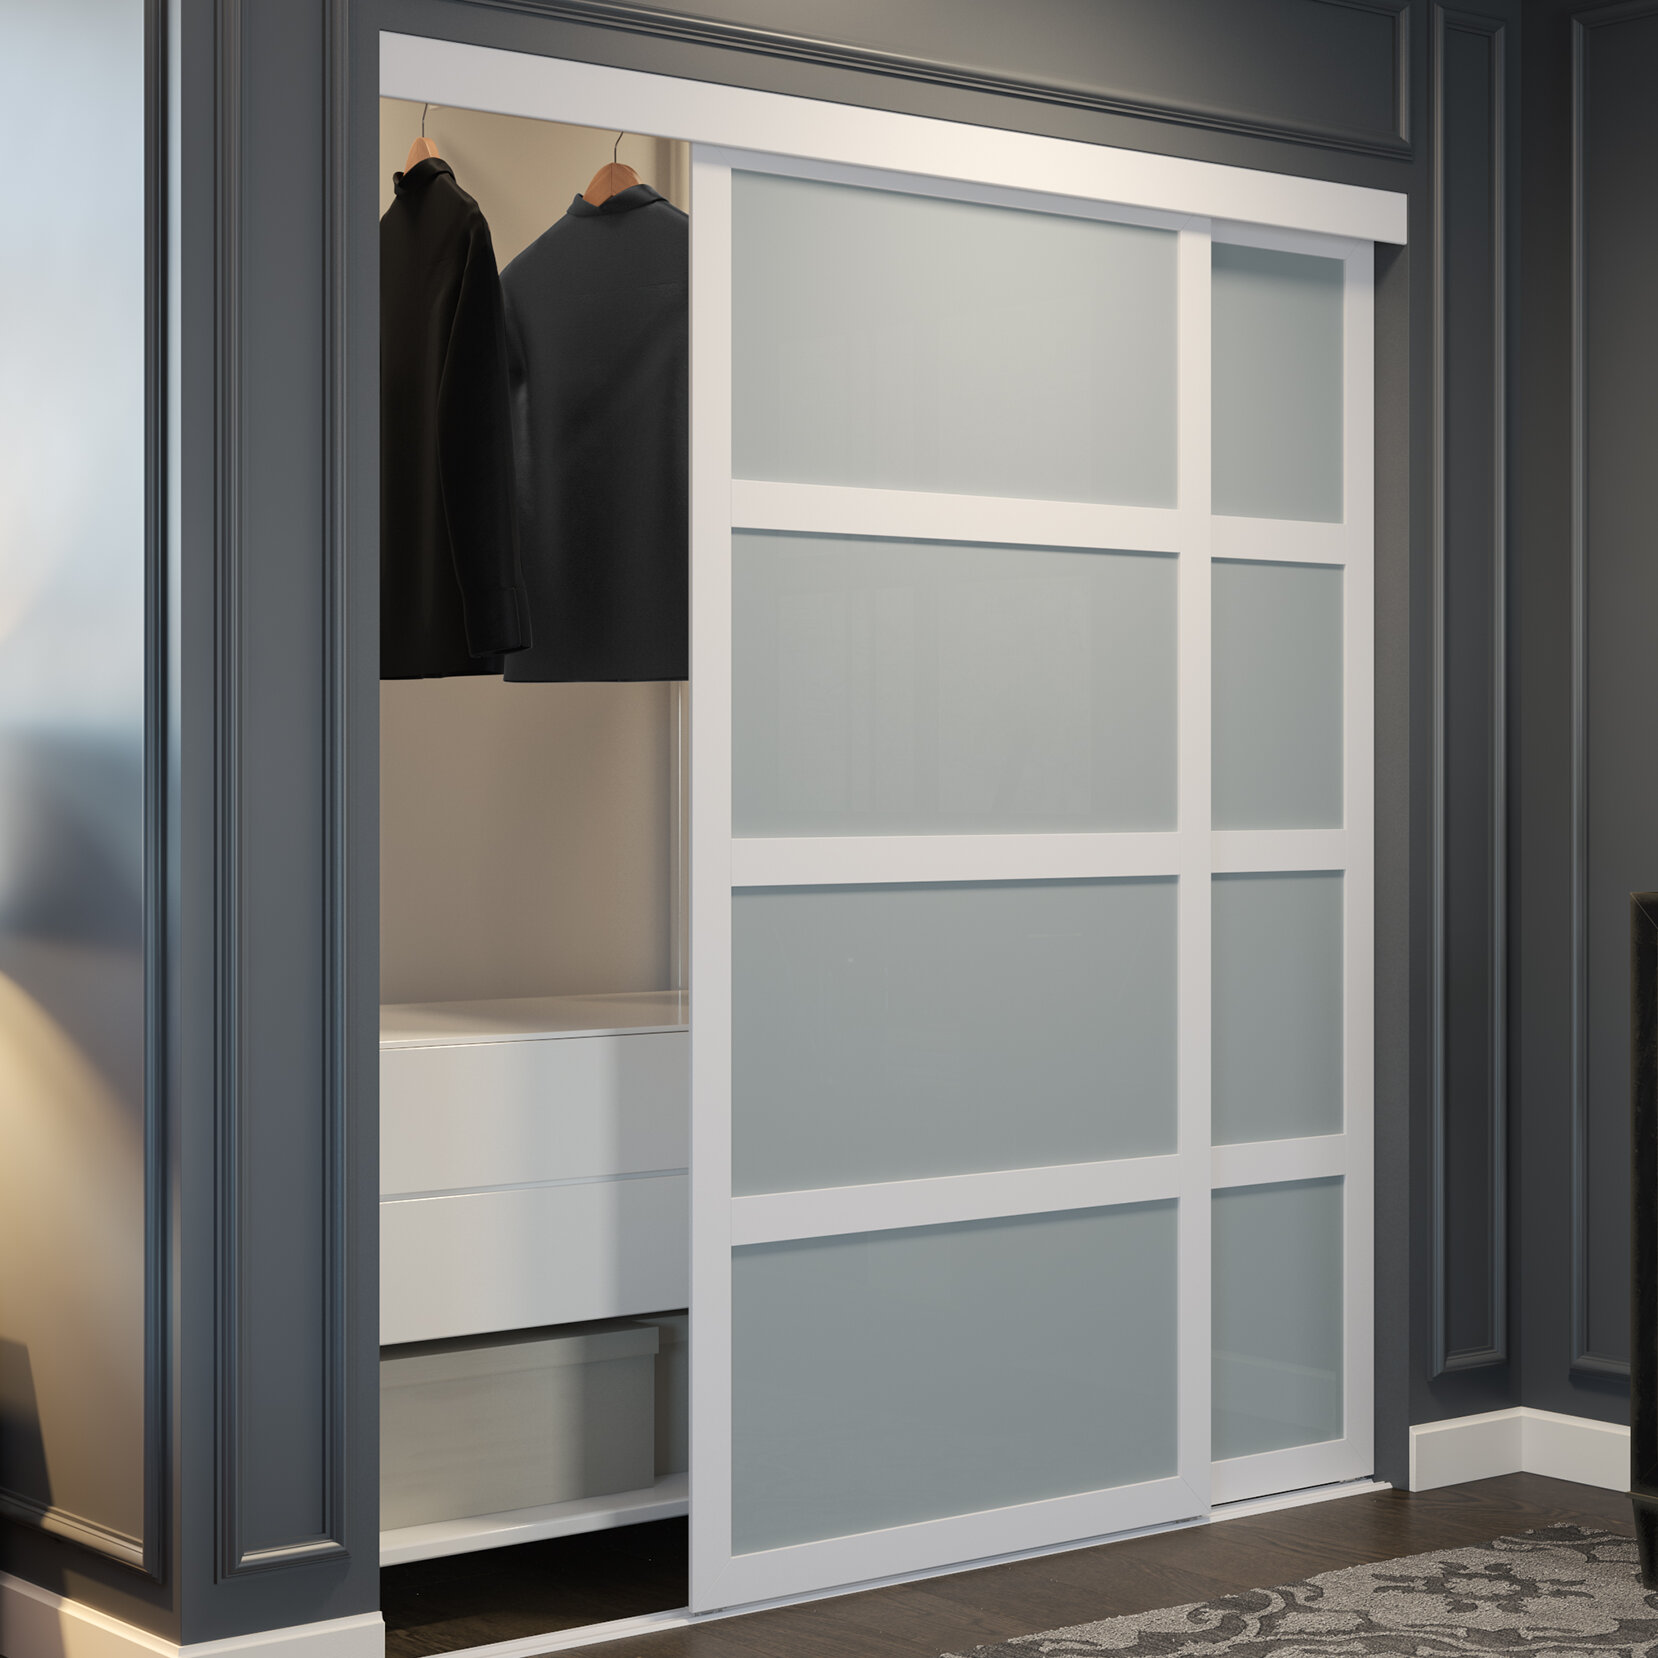 BIG SALE Find Your Perfect Closet Door You'll Love In ...